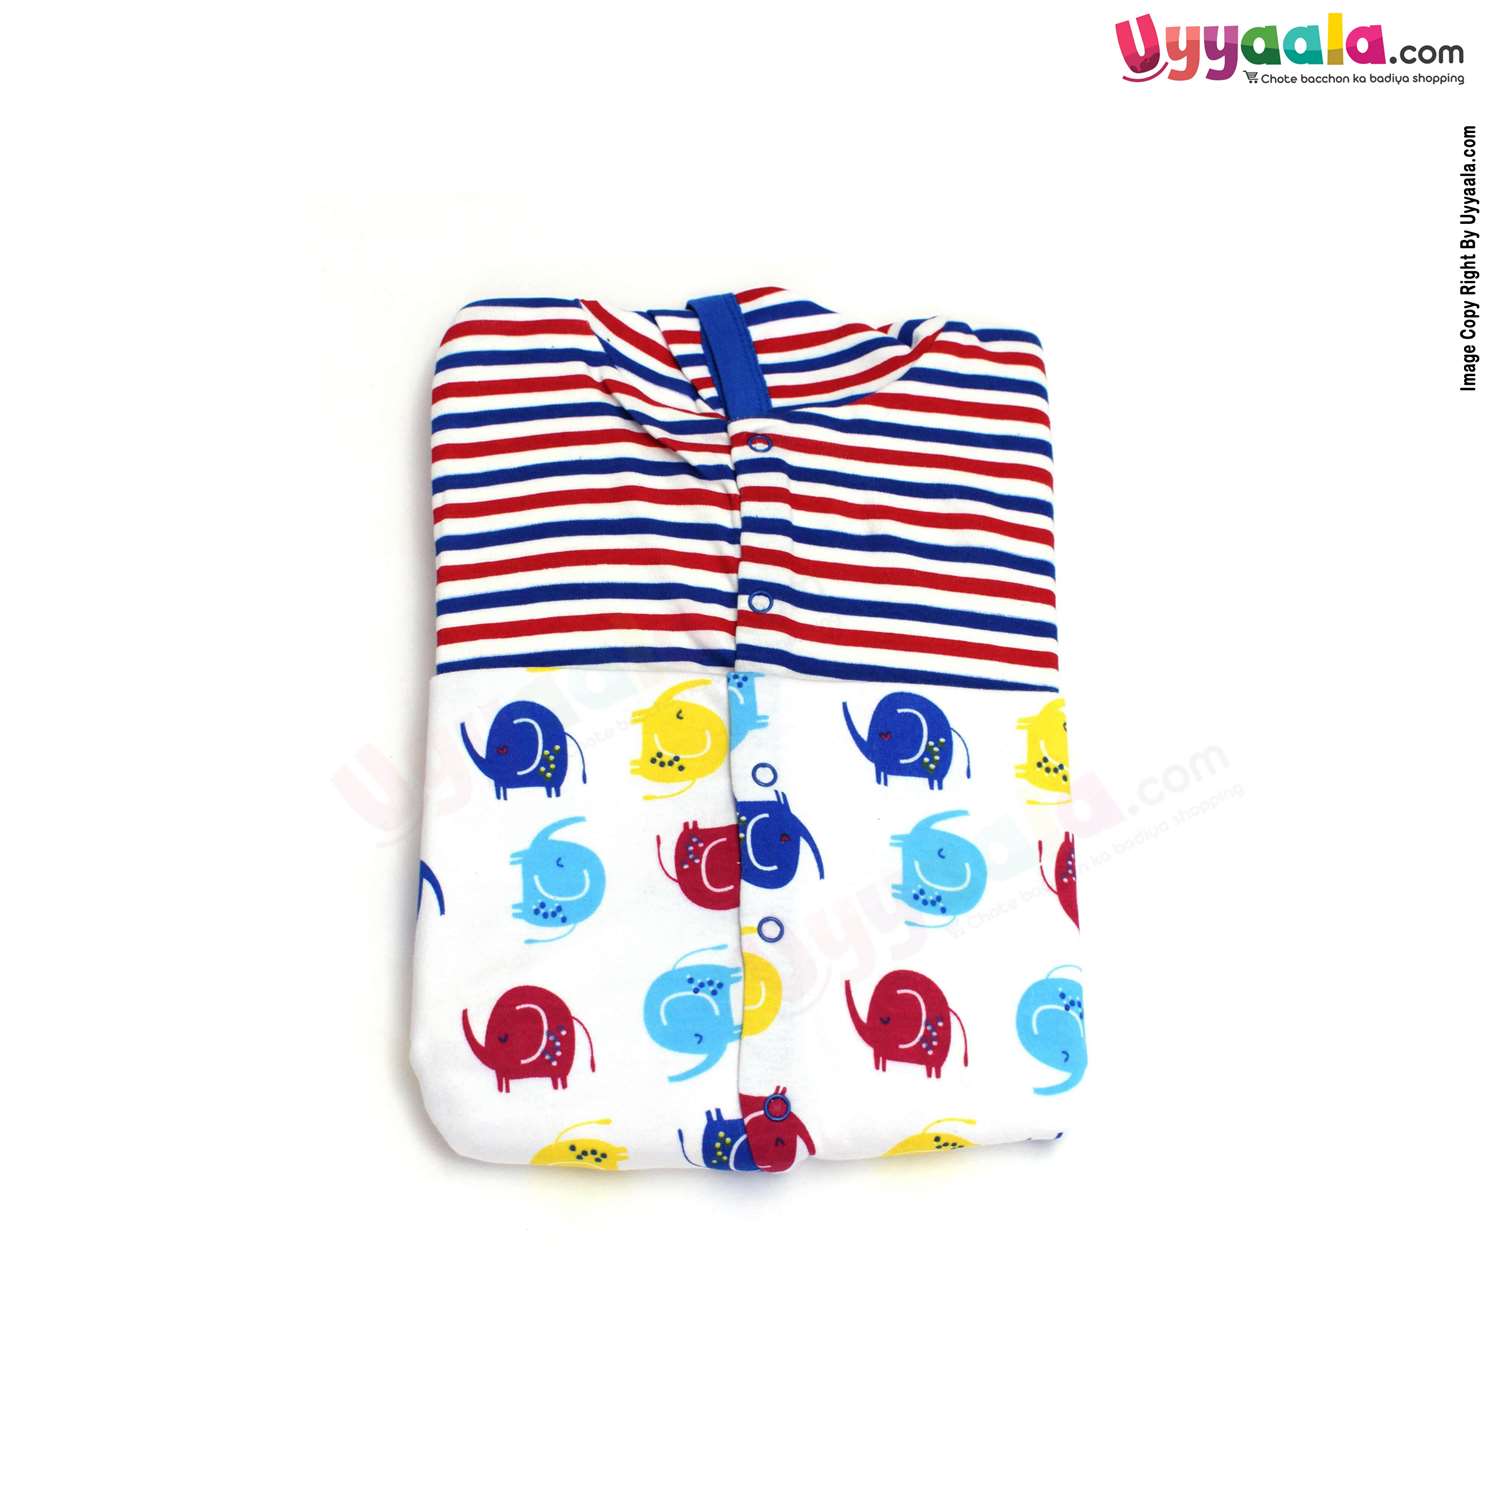 MAGIC TOWN Hooded Sleep Suits Hosiery Blue, Red & White Stripes & Elephant Print White 2P Pack, 3-6m Age